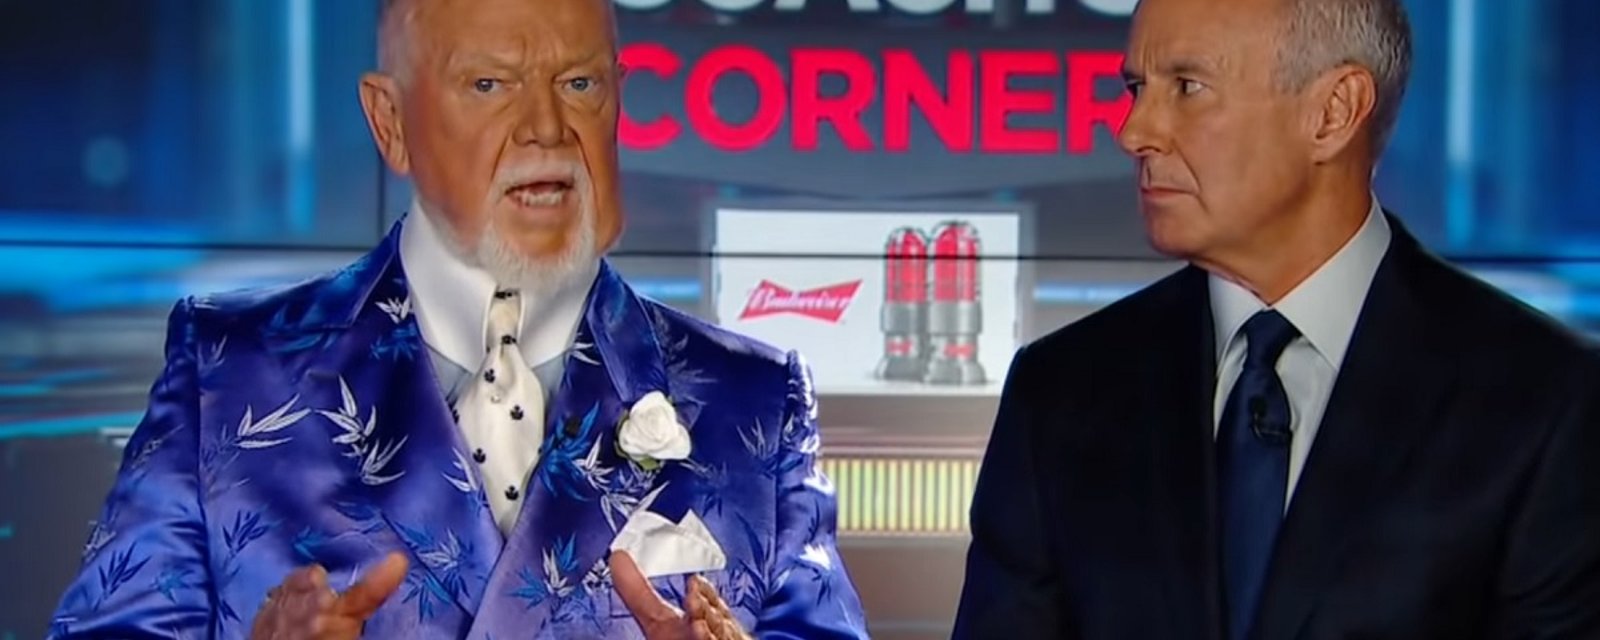 Don Cherry goes off on the Toronto Maple Leafs after the draft.